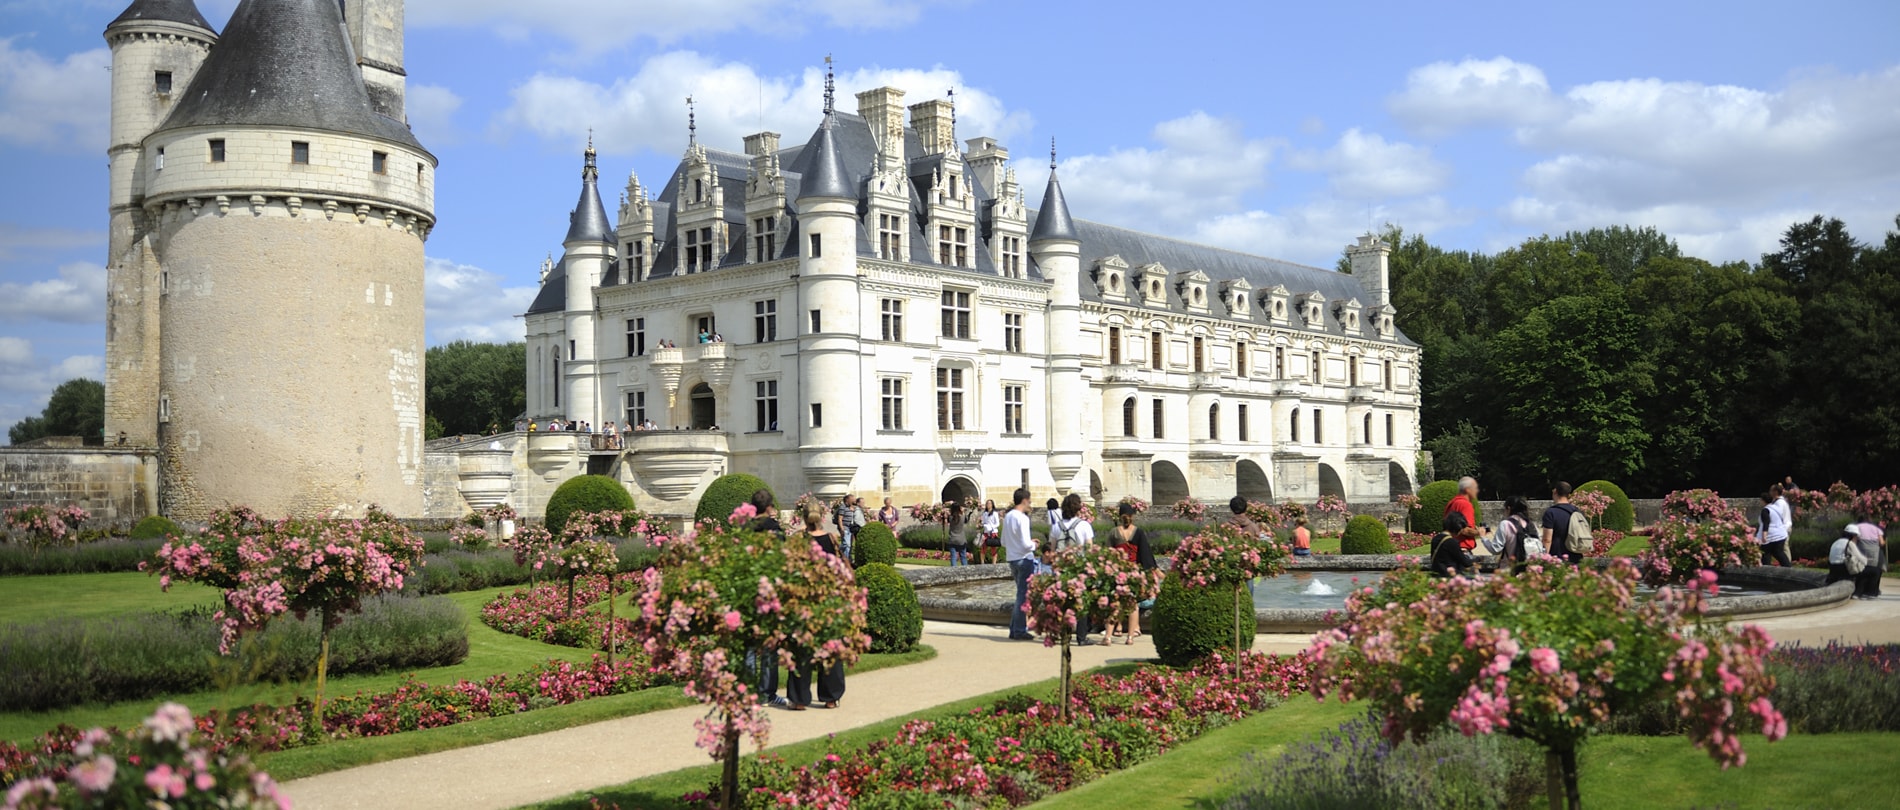 https://commons.wikimedia.org/wiki/File:Chenonceaux_French_Gardens.jpg